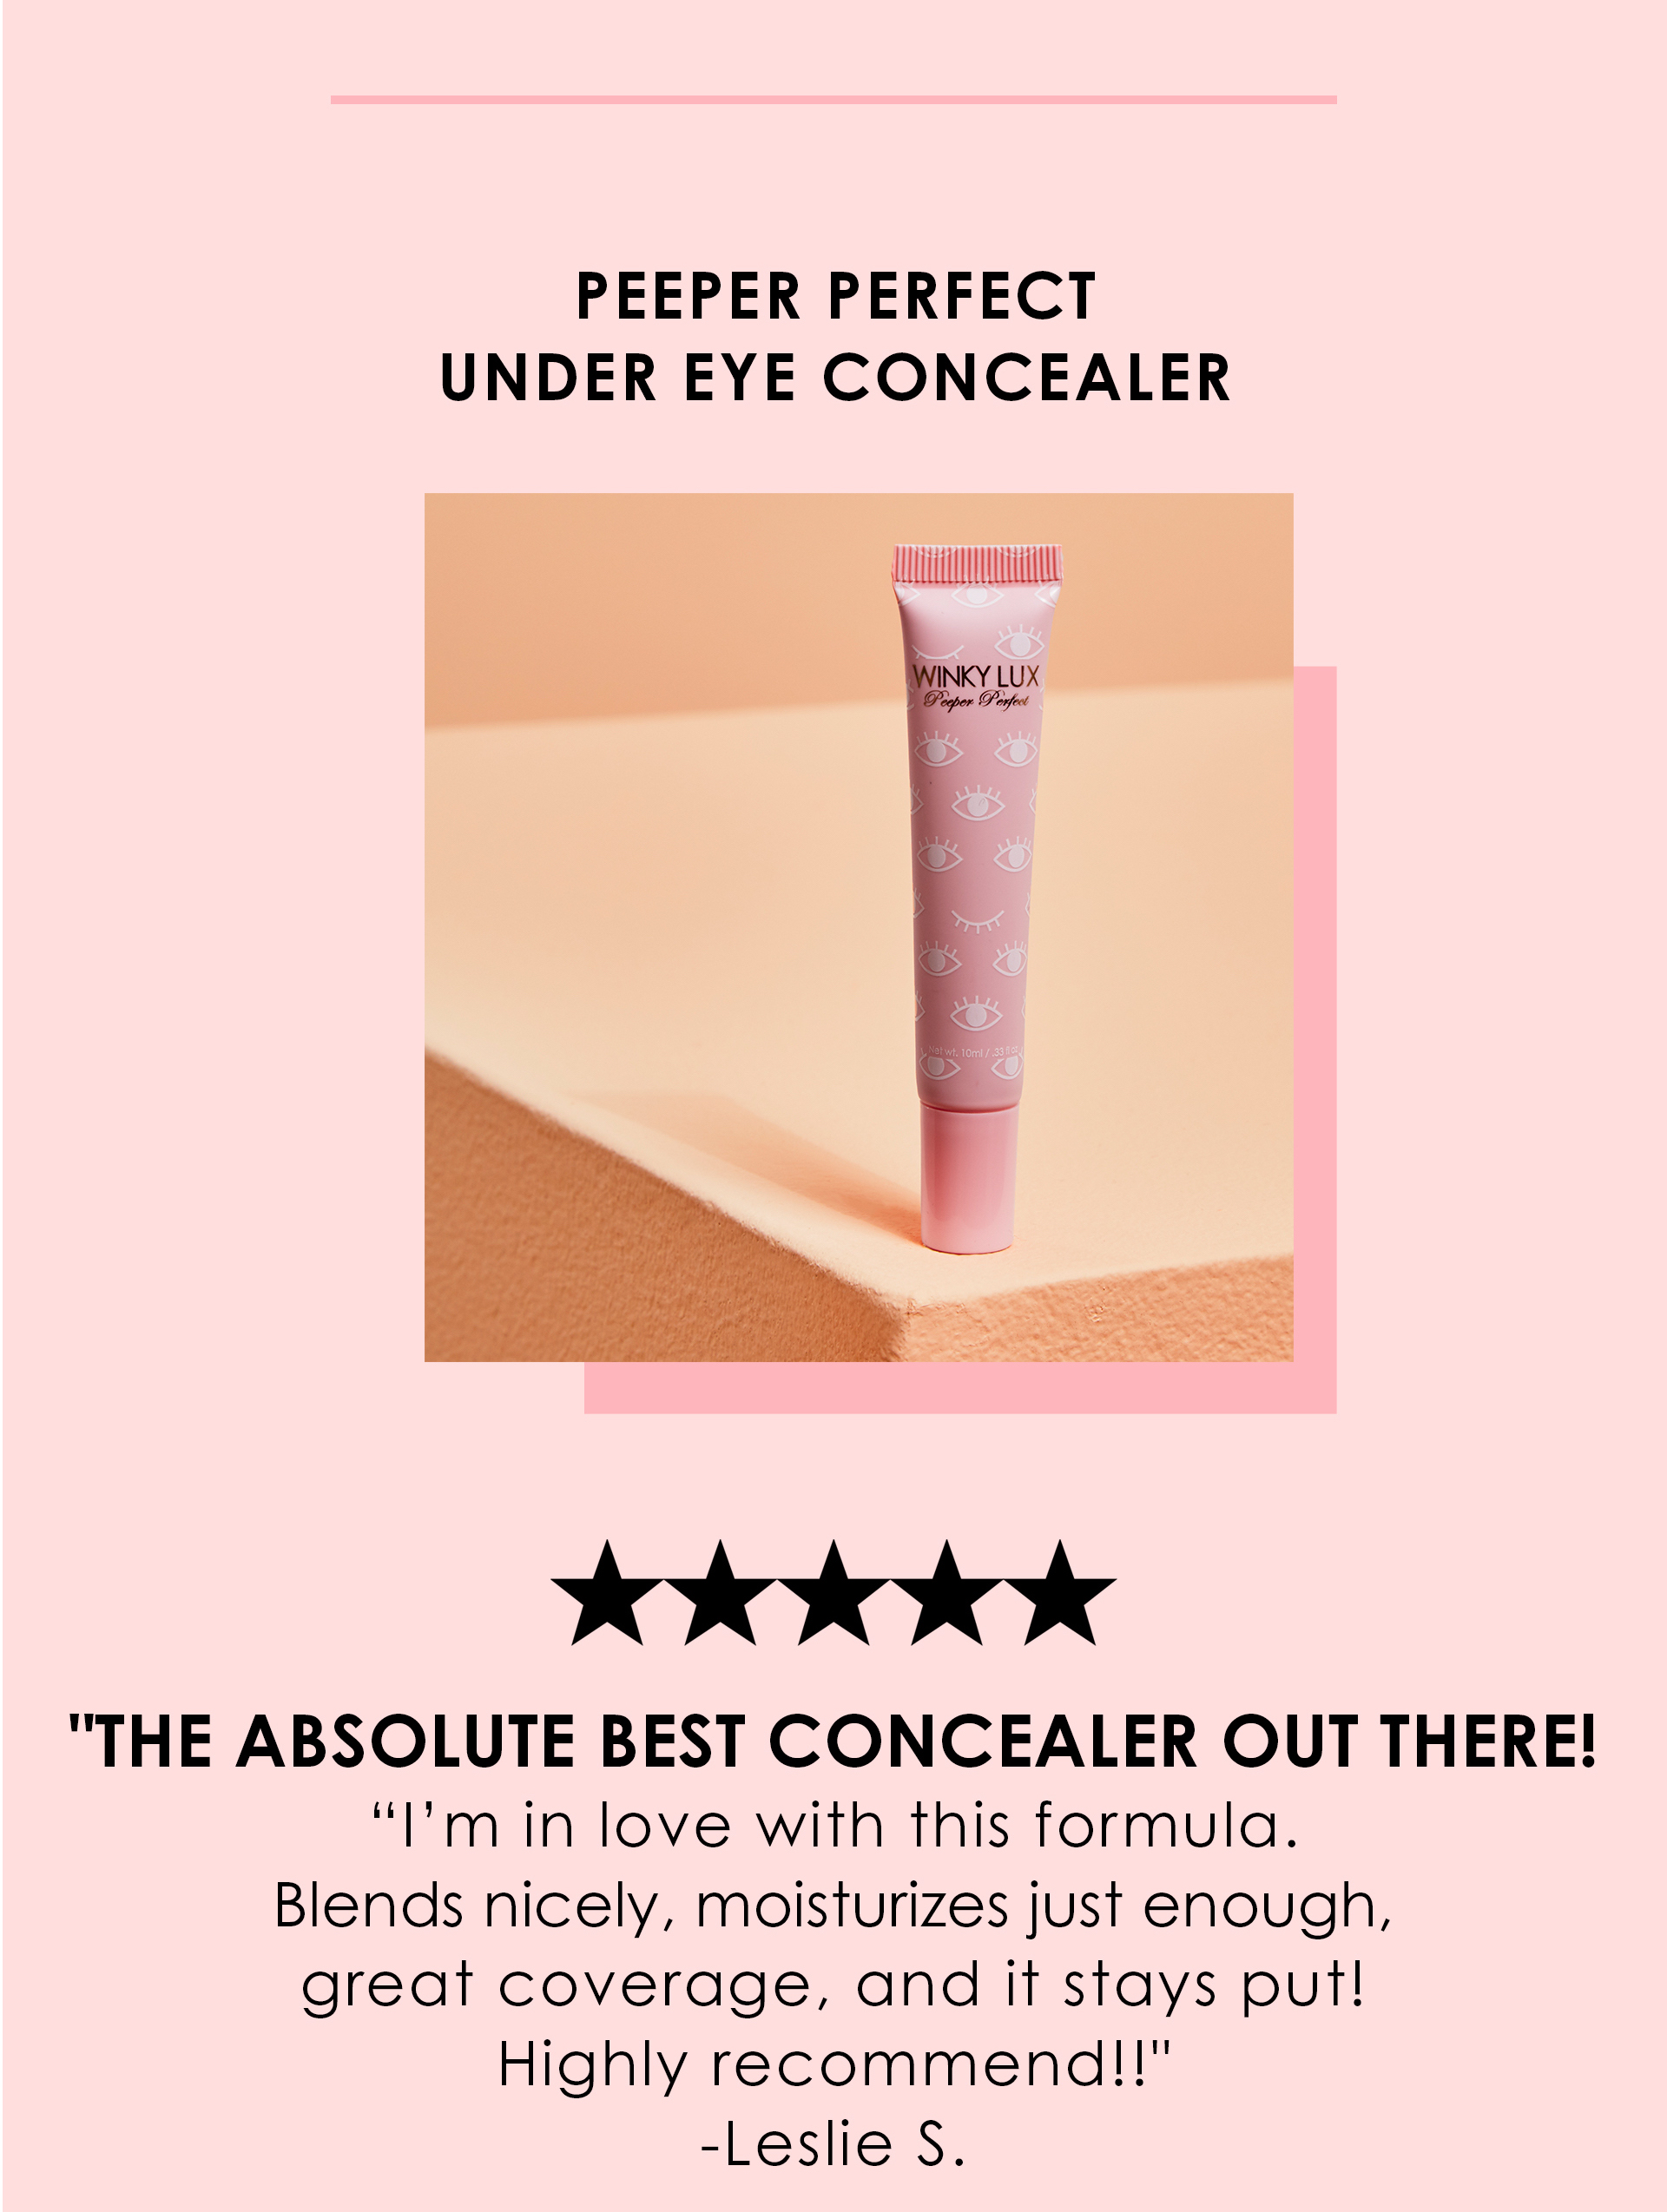 Peeper Perfect Undereye Concealer - The Absolute Best Concealer Out There!